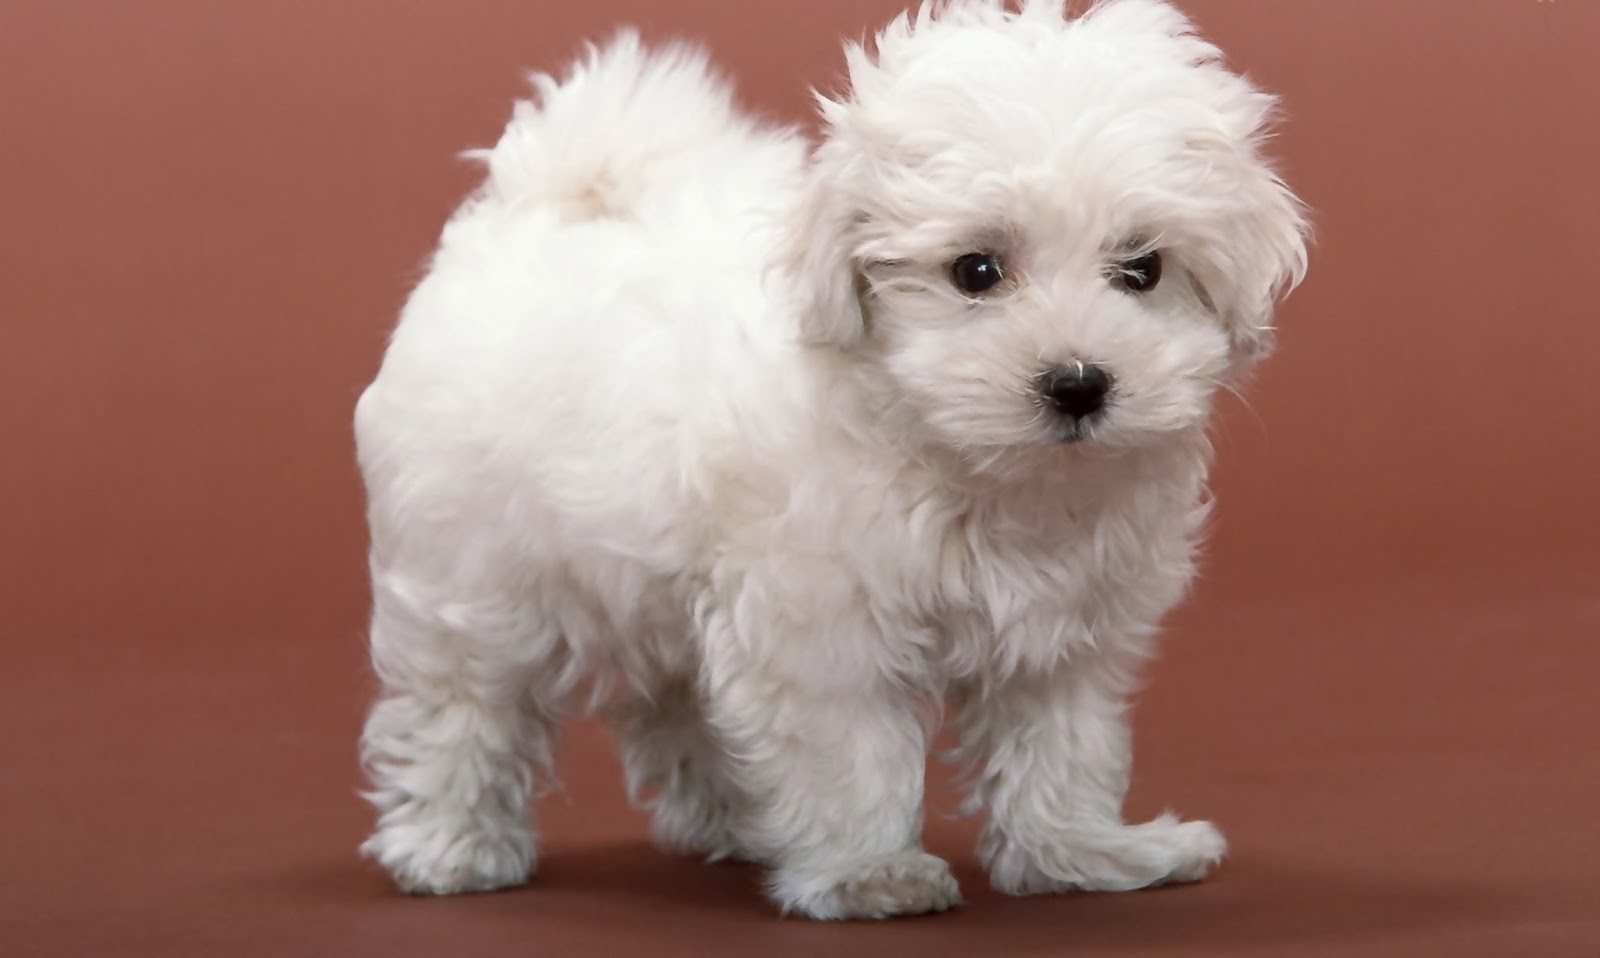 Design Puppy Wallpaper Free Download Puppy Wallpapers Free ...